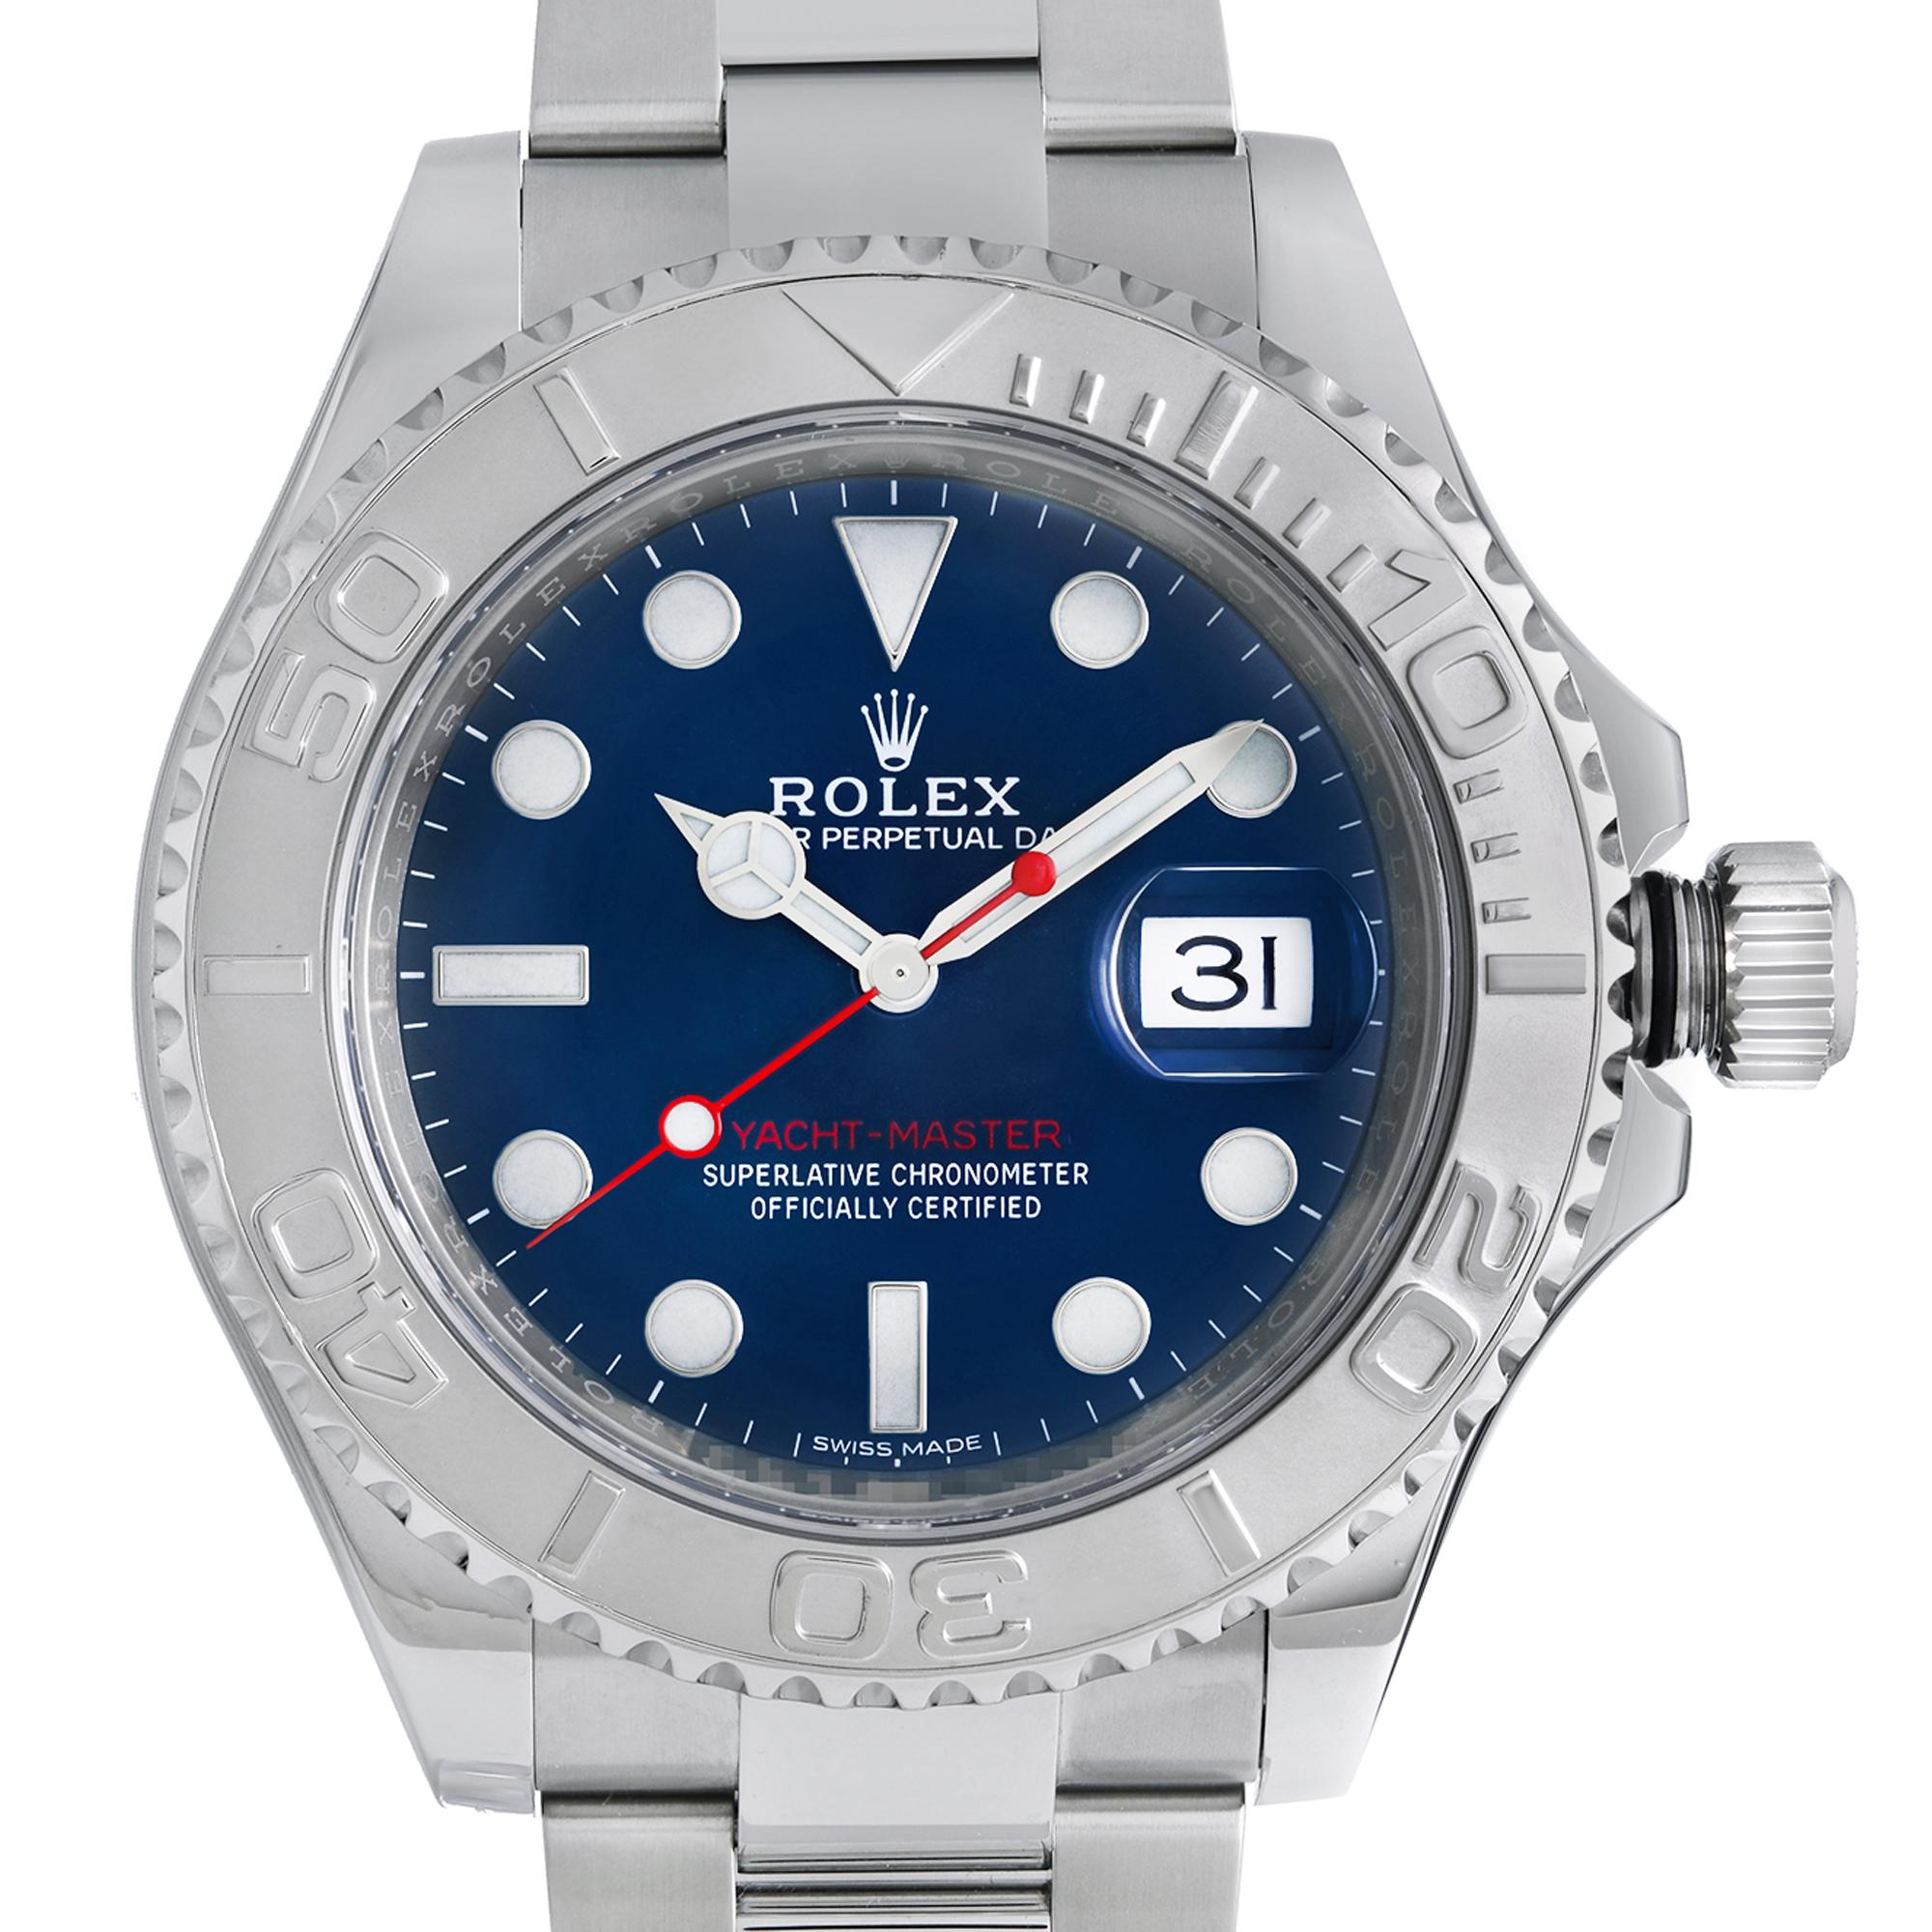 Damaged bezel at 2 O' Clock as visible in pictures. Original Box and Papers are Included. Authenticity Card is included. Covered by 1-year Chronostore Warranty. 
Details:
Brand Rolex
Color Blue
Department Men
Model Number 116622
Model Rolex